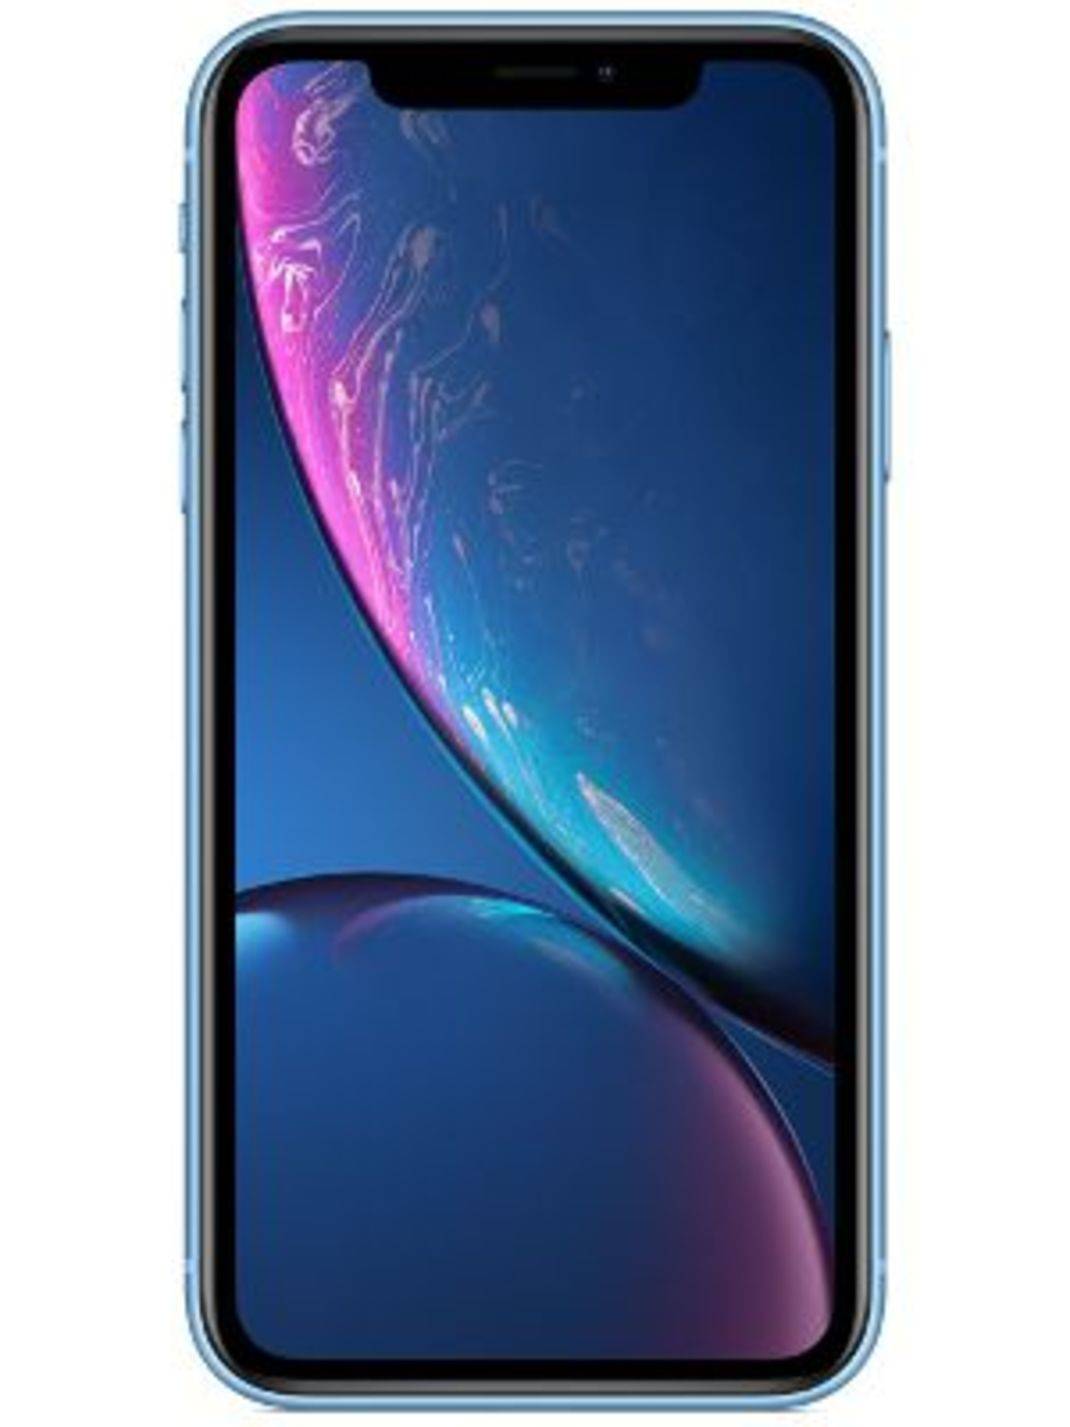 Apple iPhone 128GB vs Samsung Galaxy A10: Compare Specifications, Price | Gadgets Now